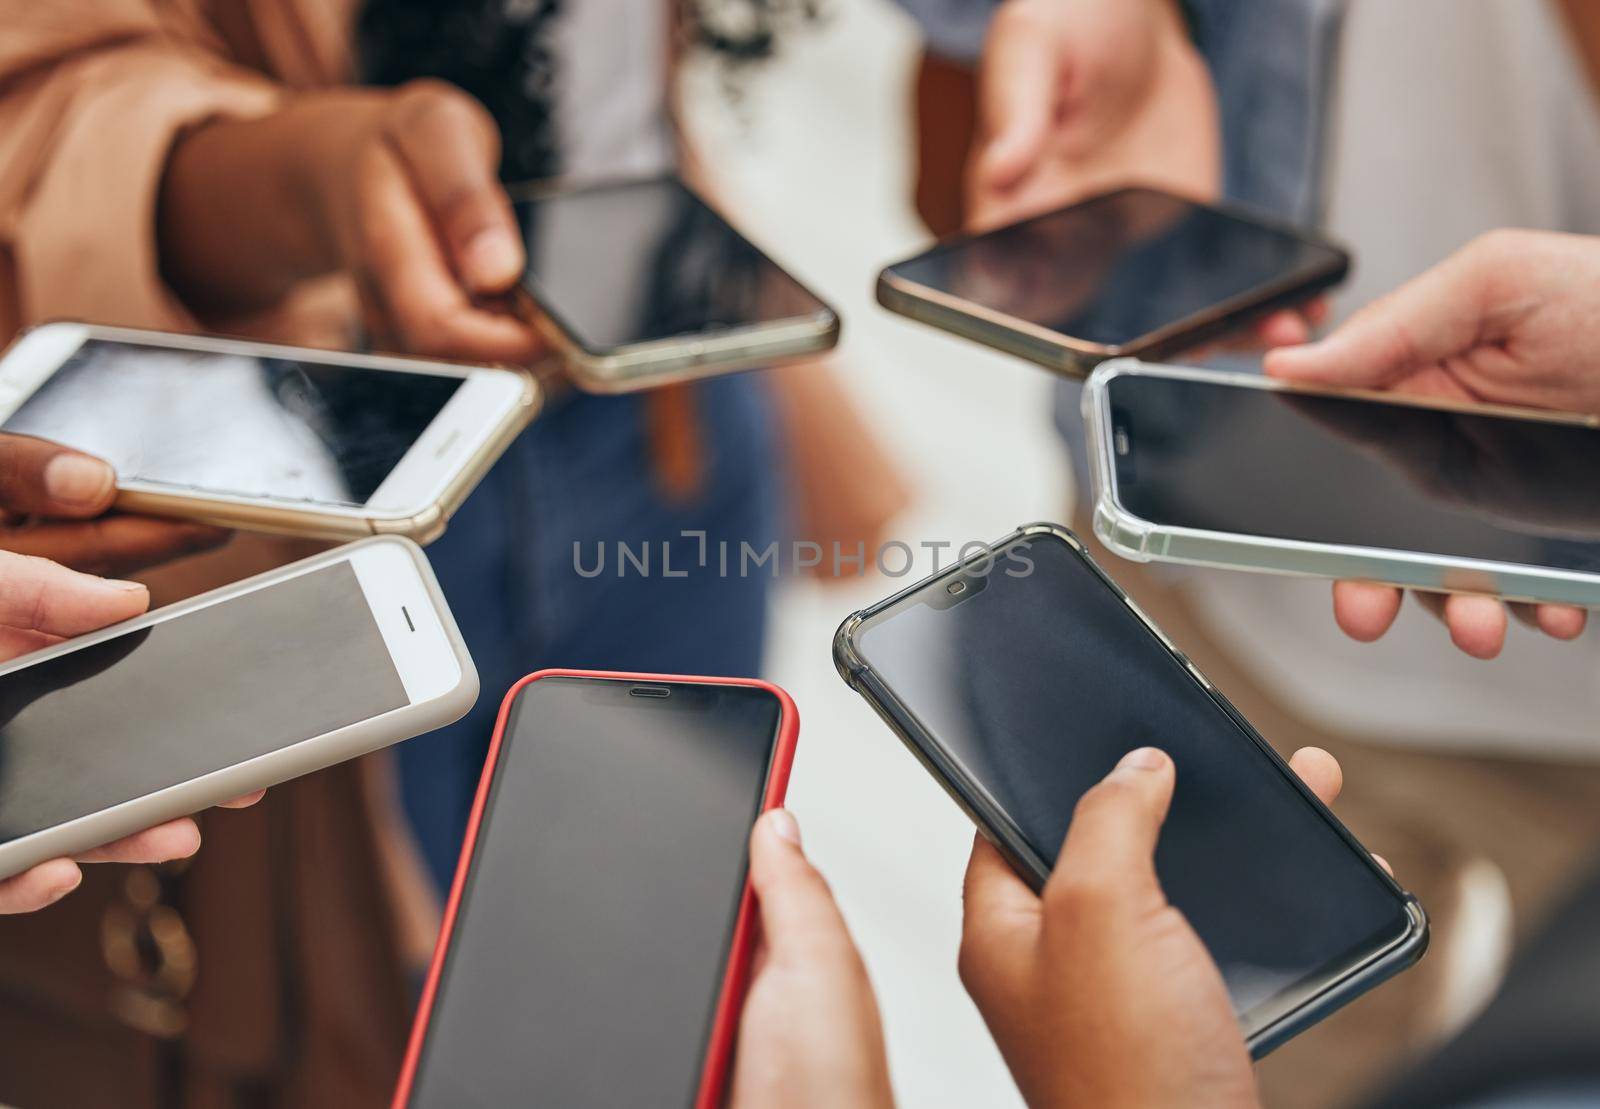 People group hands, phone screen and social media mobile apps, typing and digital iot connection together. Closeup social network, internet website and 5g smartphone cloud computing technology online.